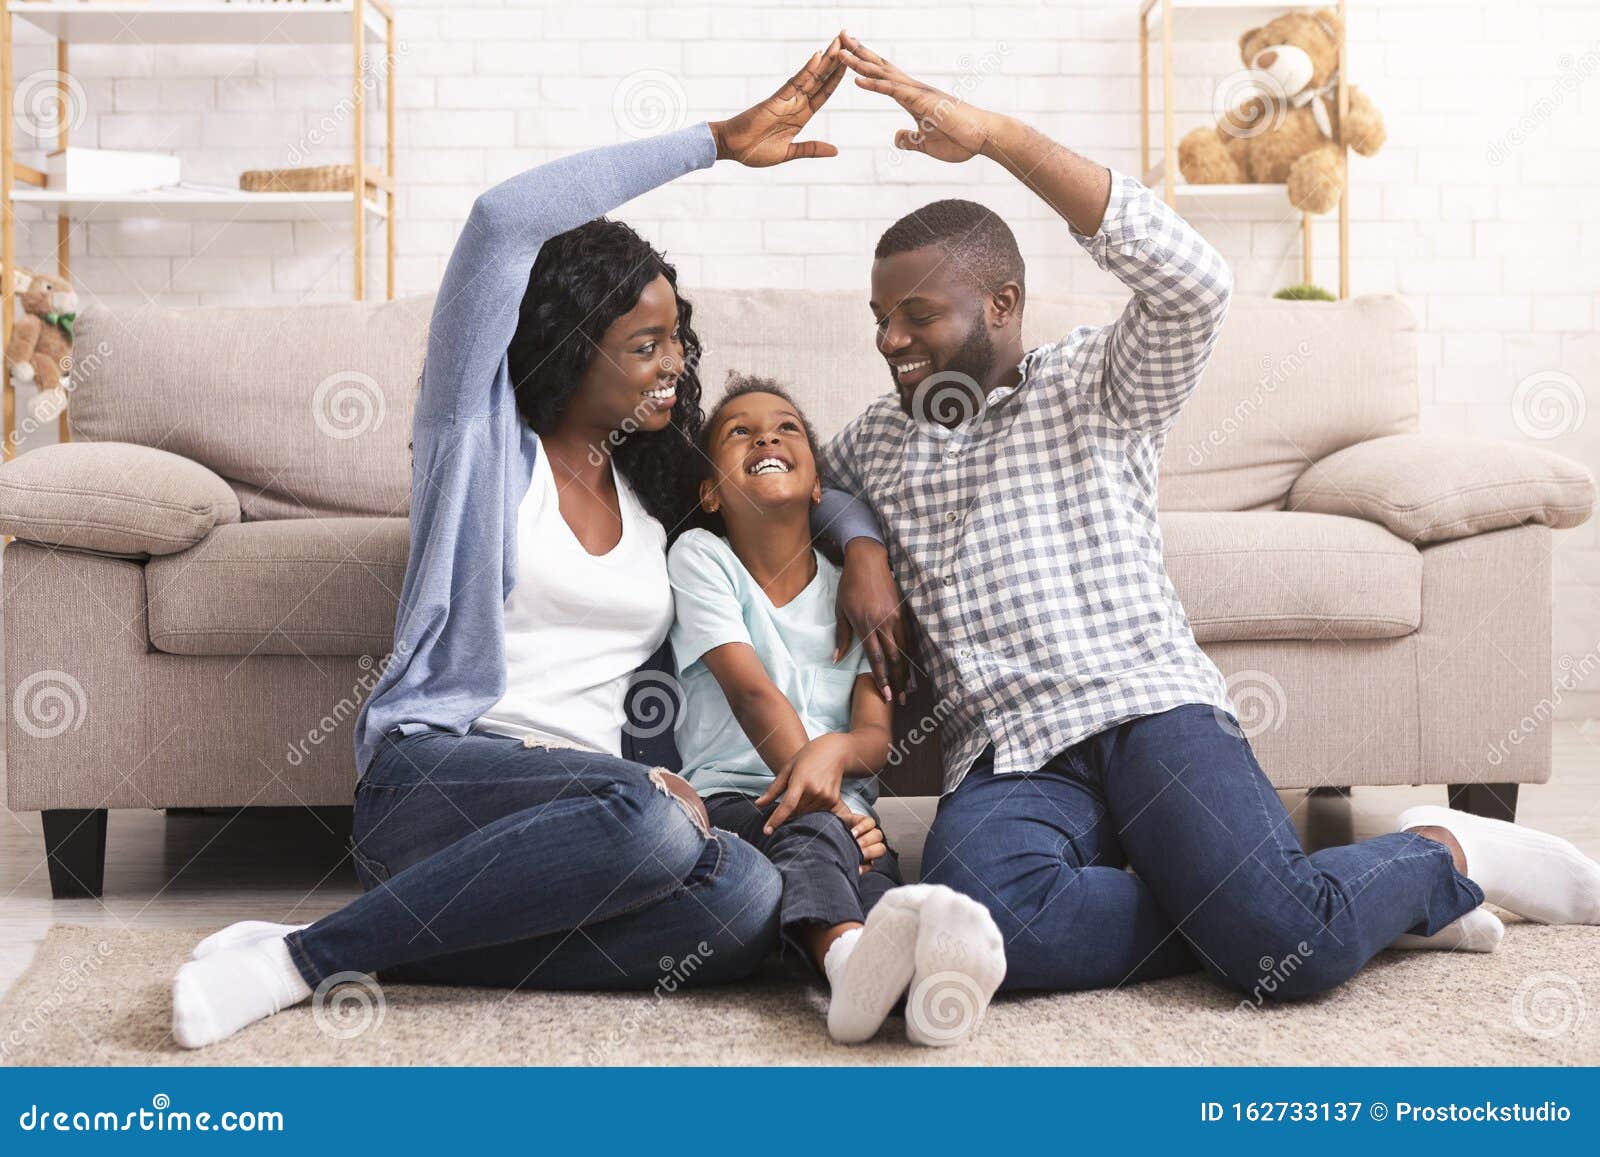 black family making ic roof of hands above little girl